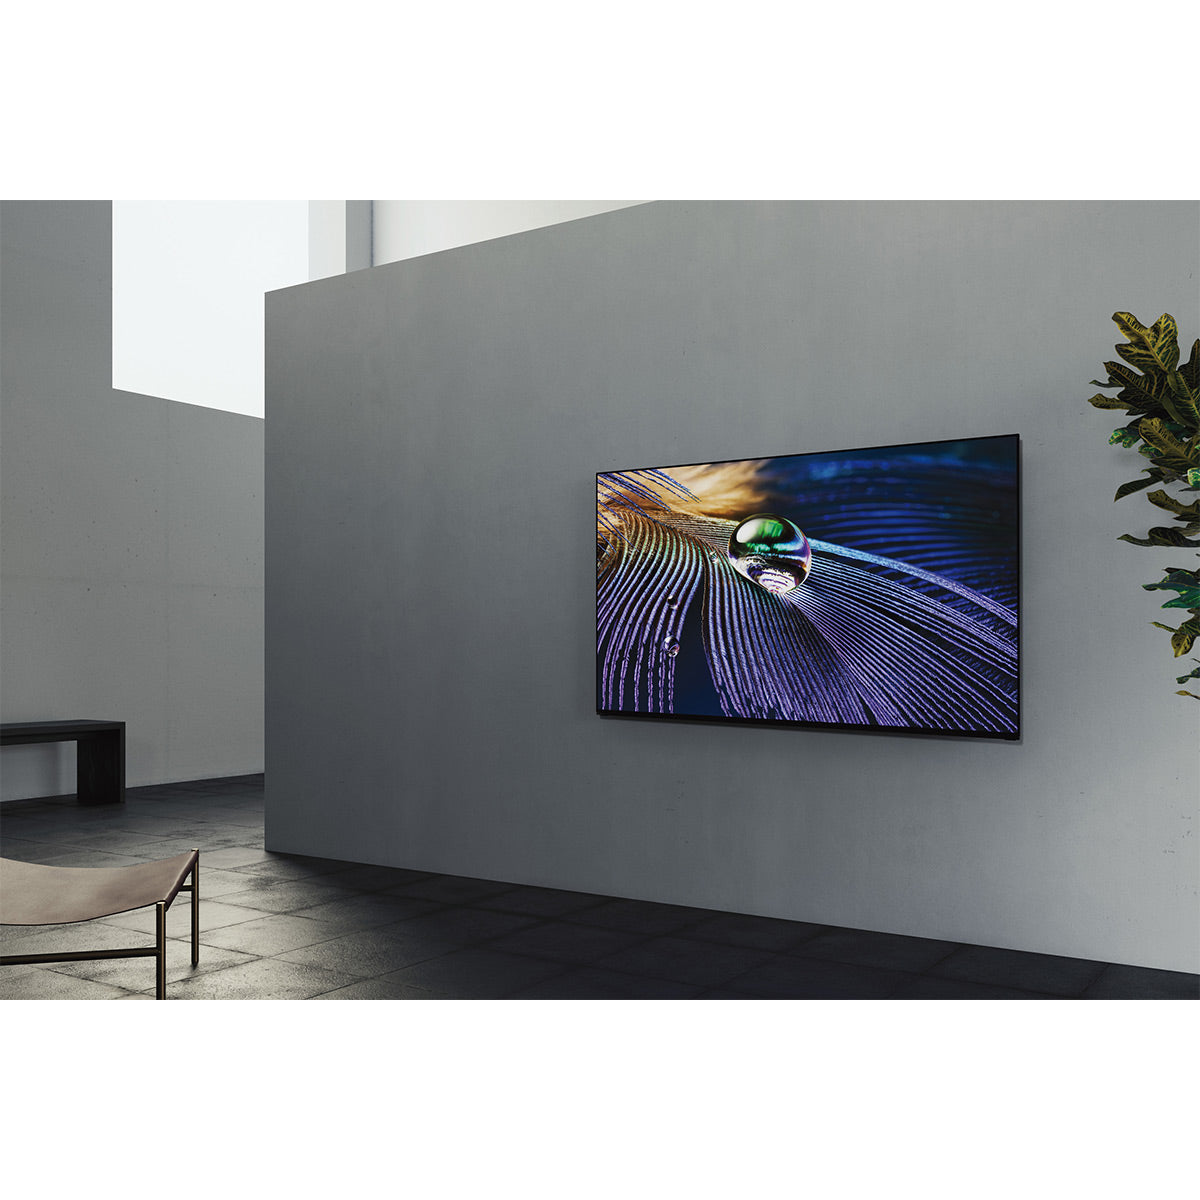 Sony XR83A90J 83" Class BRAVIA XR OLED 4K Ultra HD Smart Google TV with Dolby Vision HDR